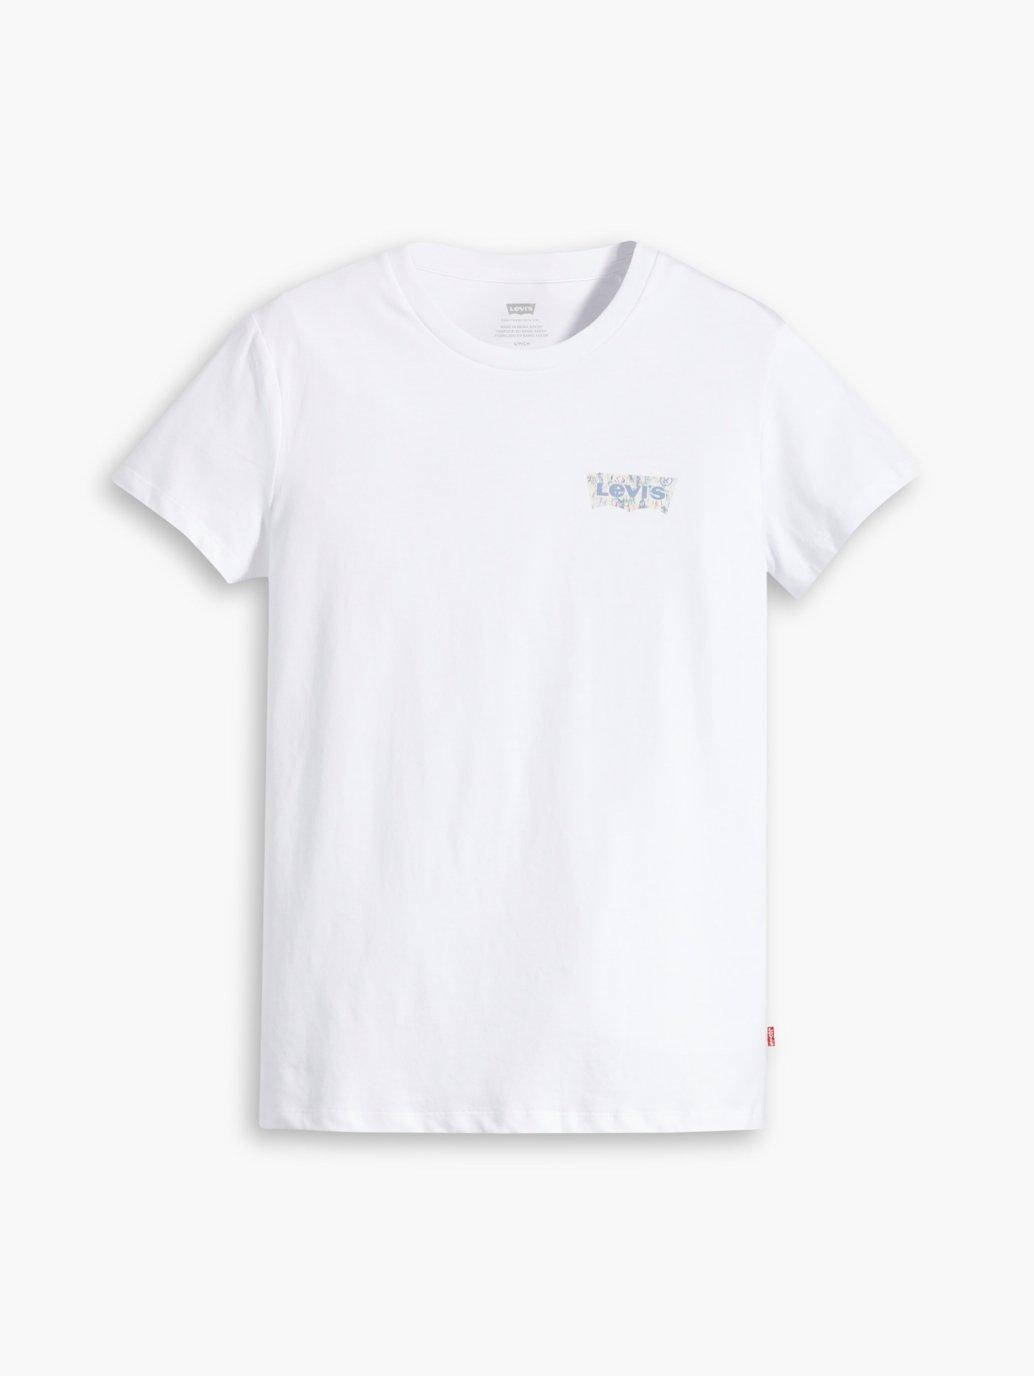 Buy Levi's Women's Perfect Tee | Levi’s Official Online Store SG